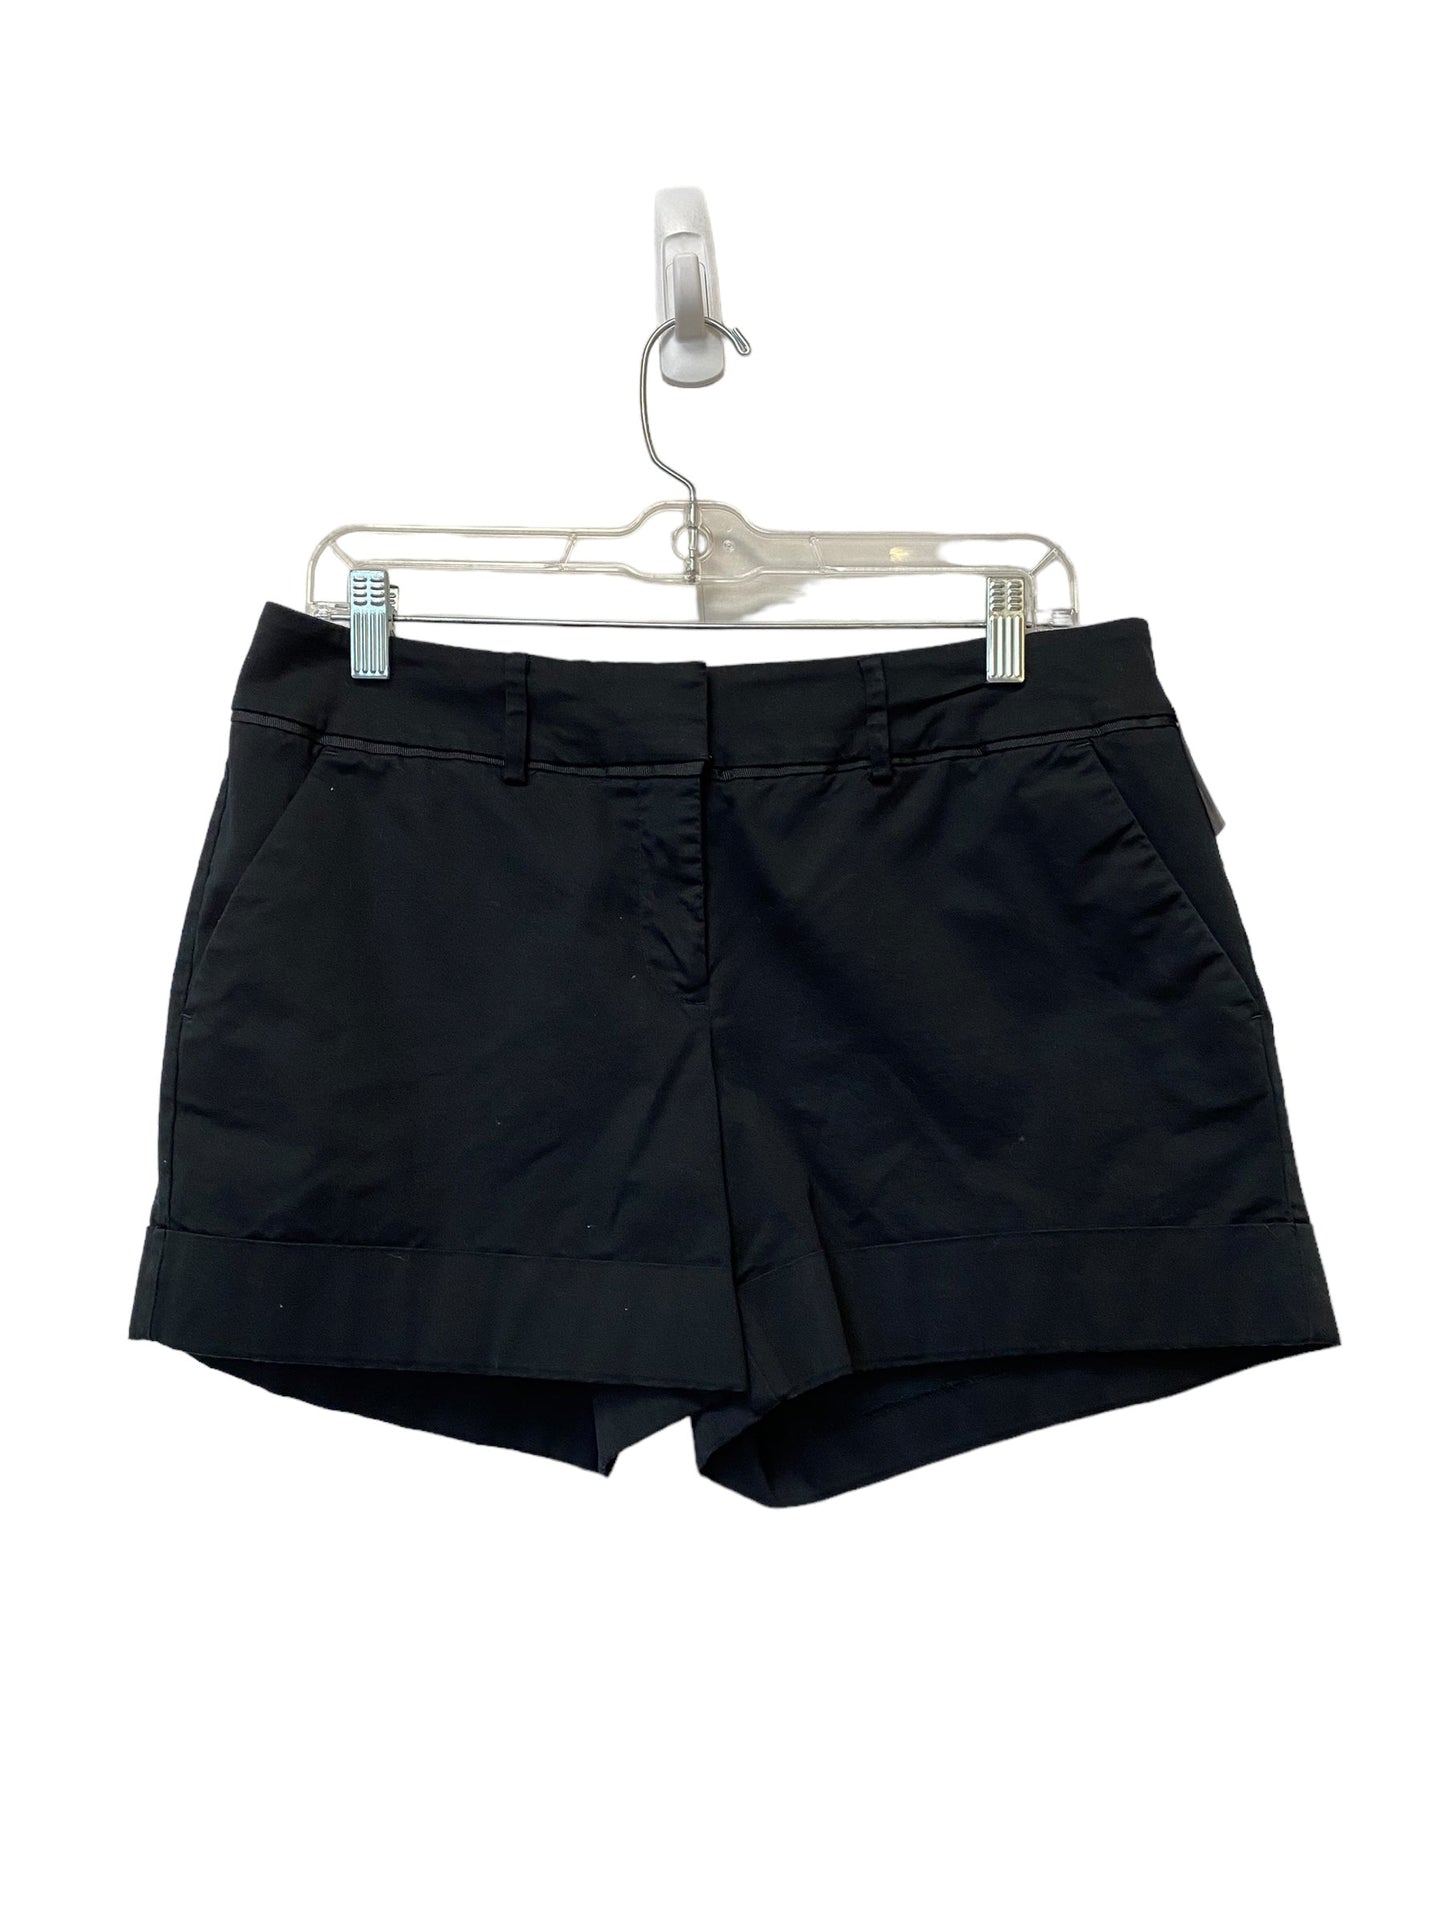 Black Shorts New York And Co, Size 8